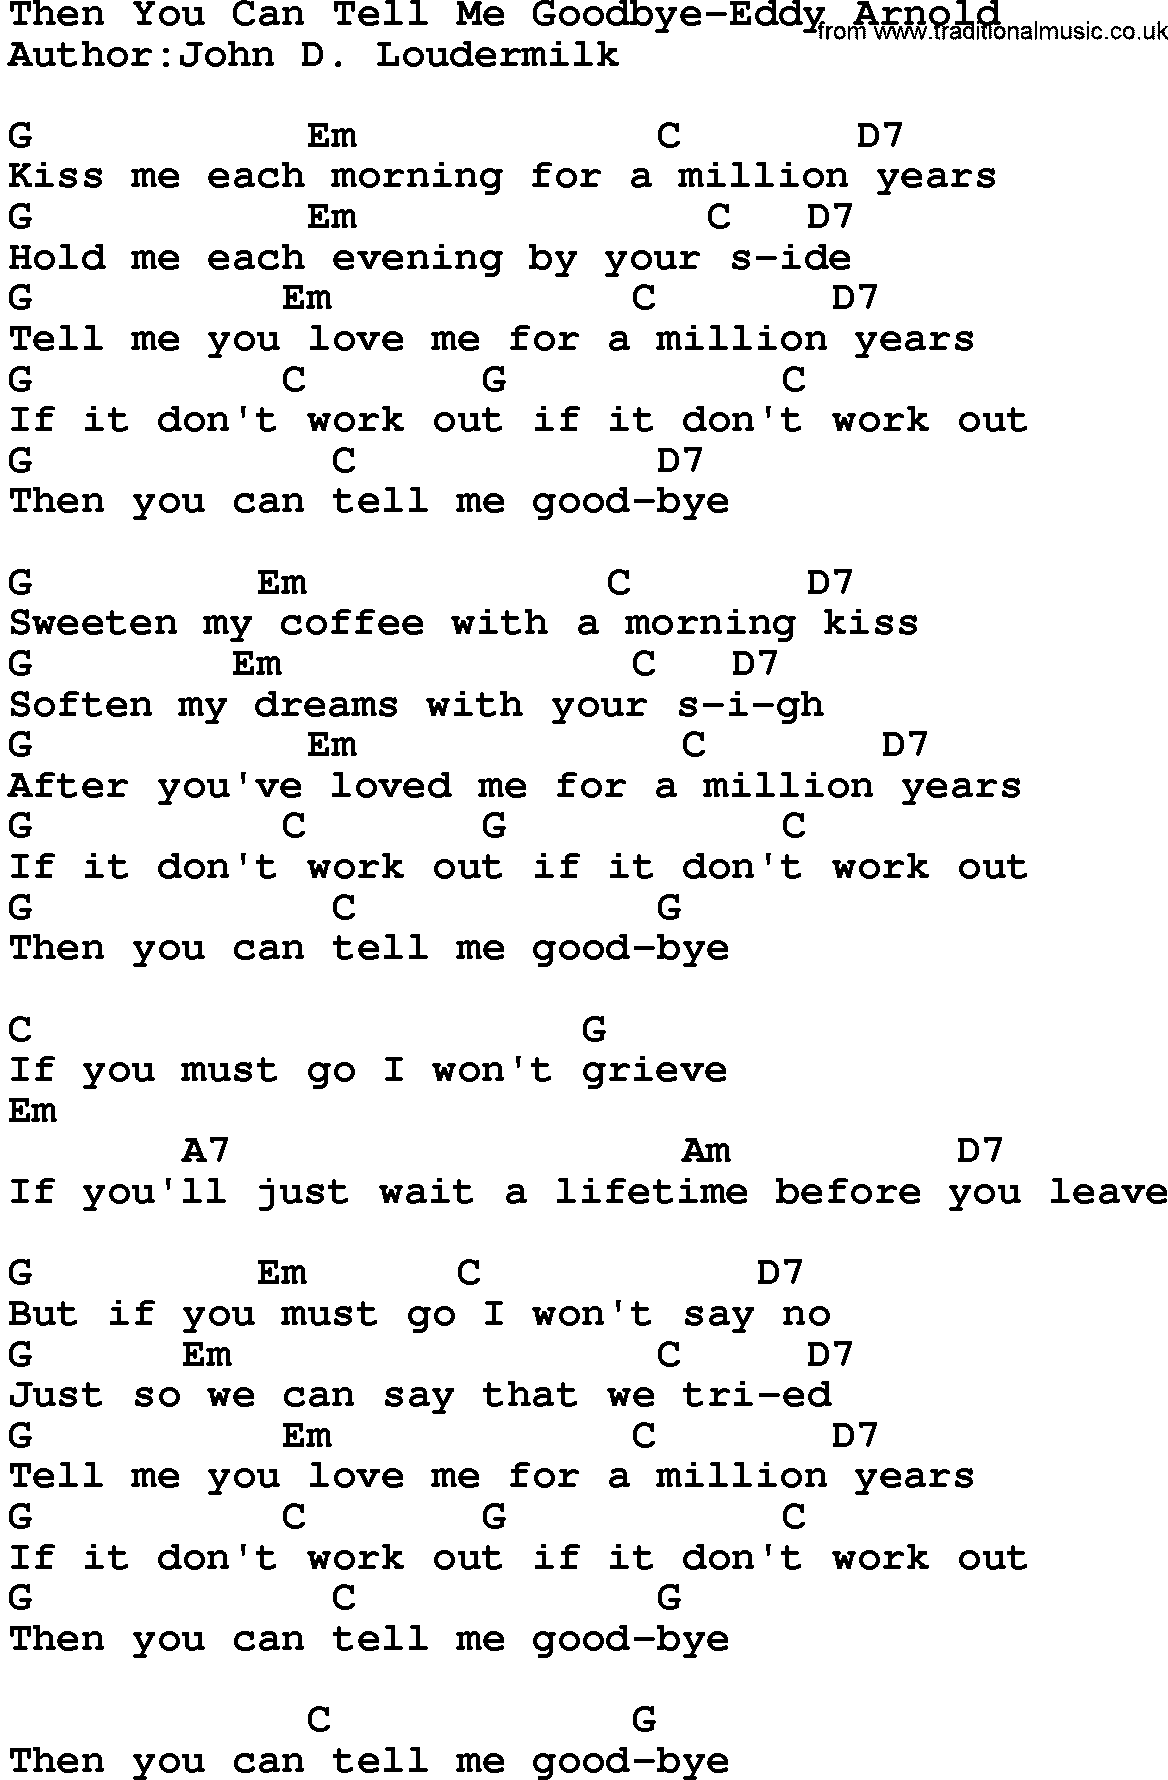 Country music song: Then You Can Tell Me Goodbye-Eddy Arnold lyrics and chords